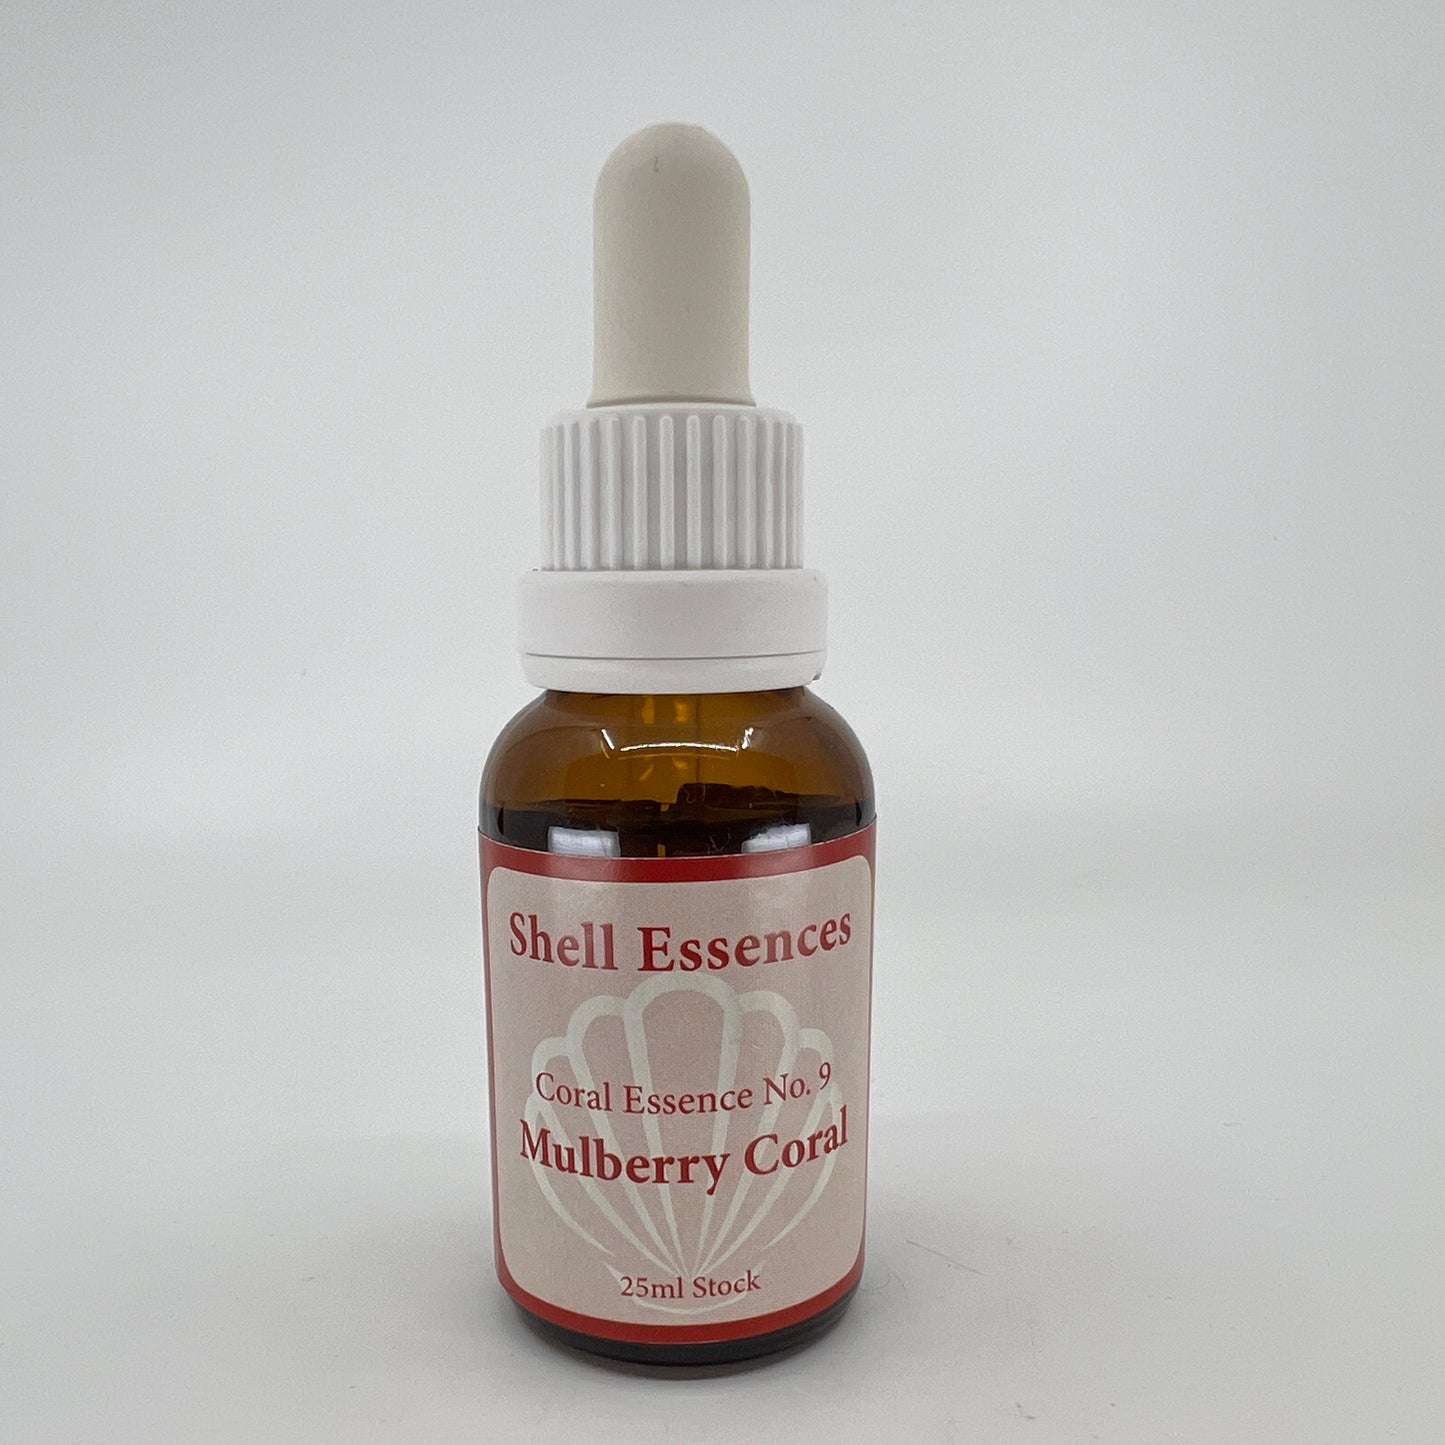 Mulberry coral essence 25ml